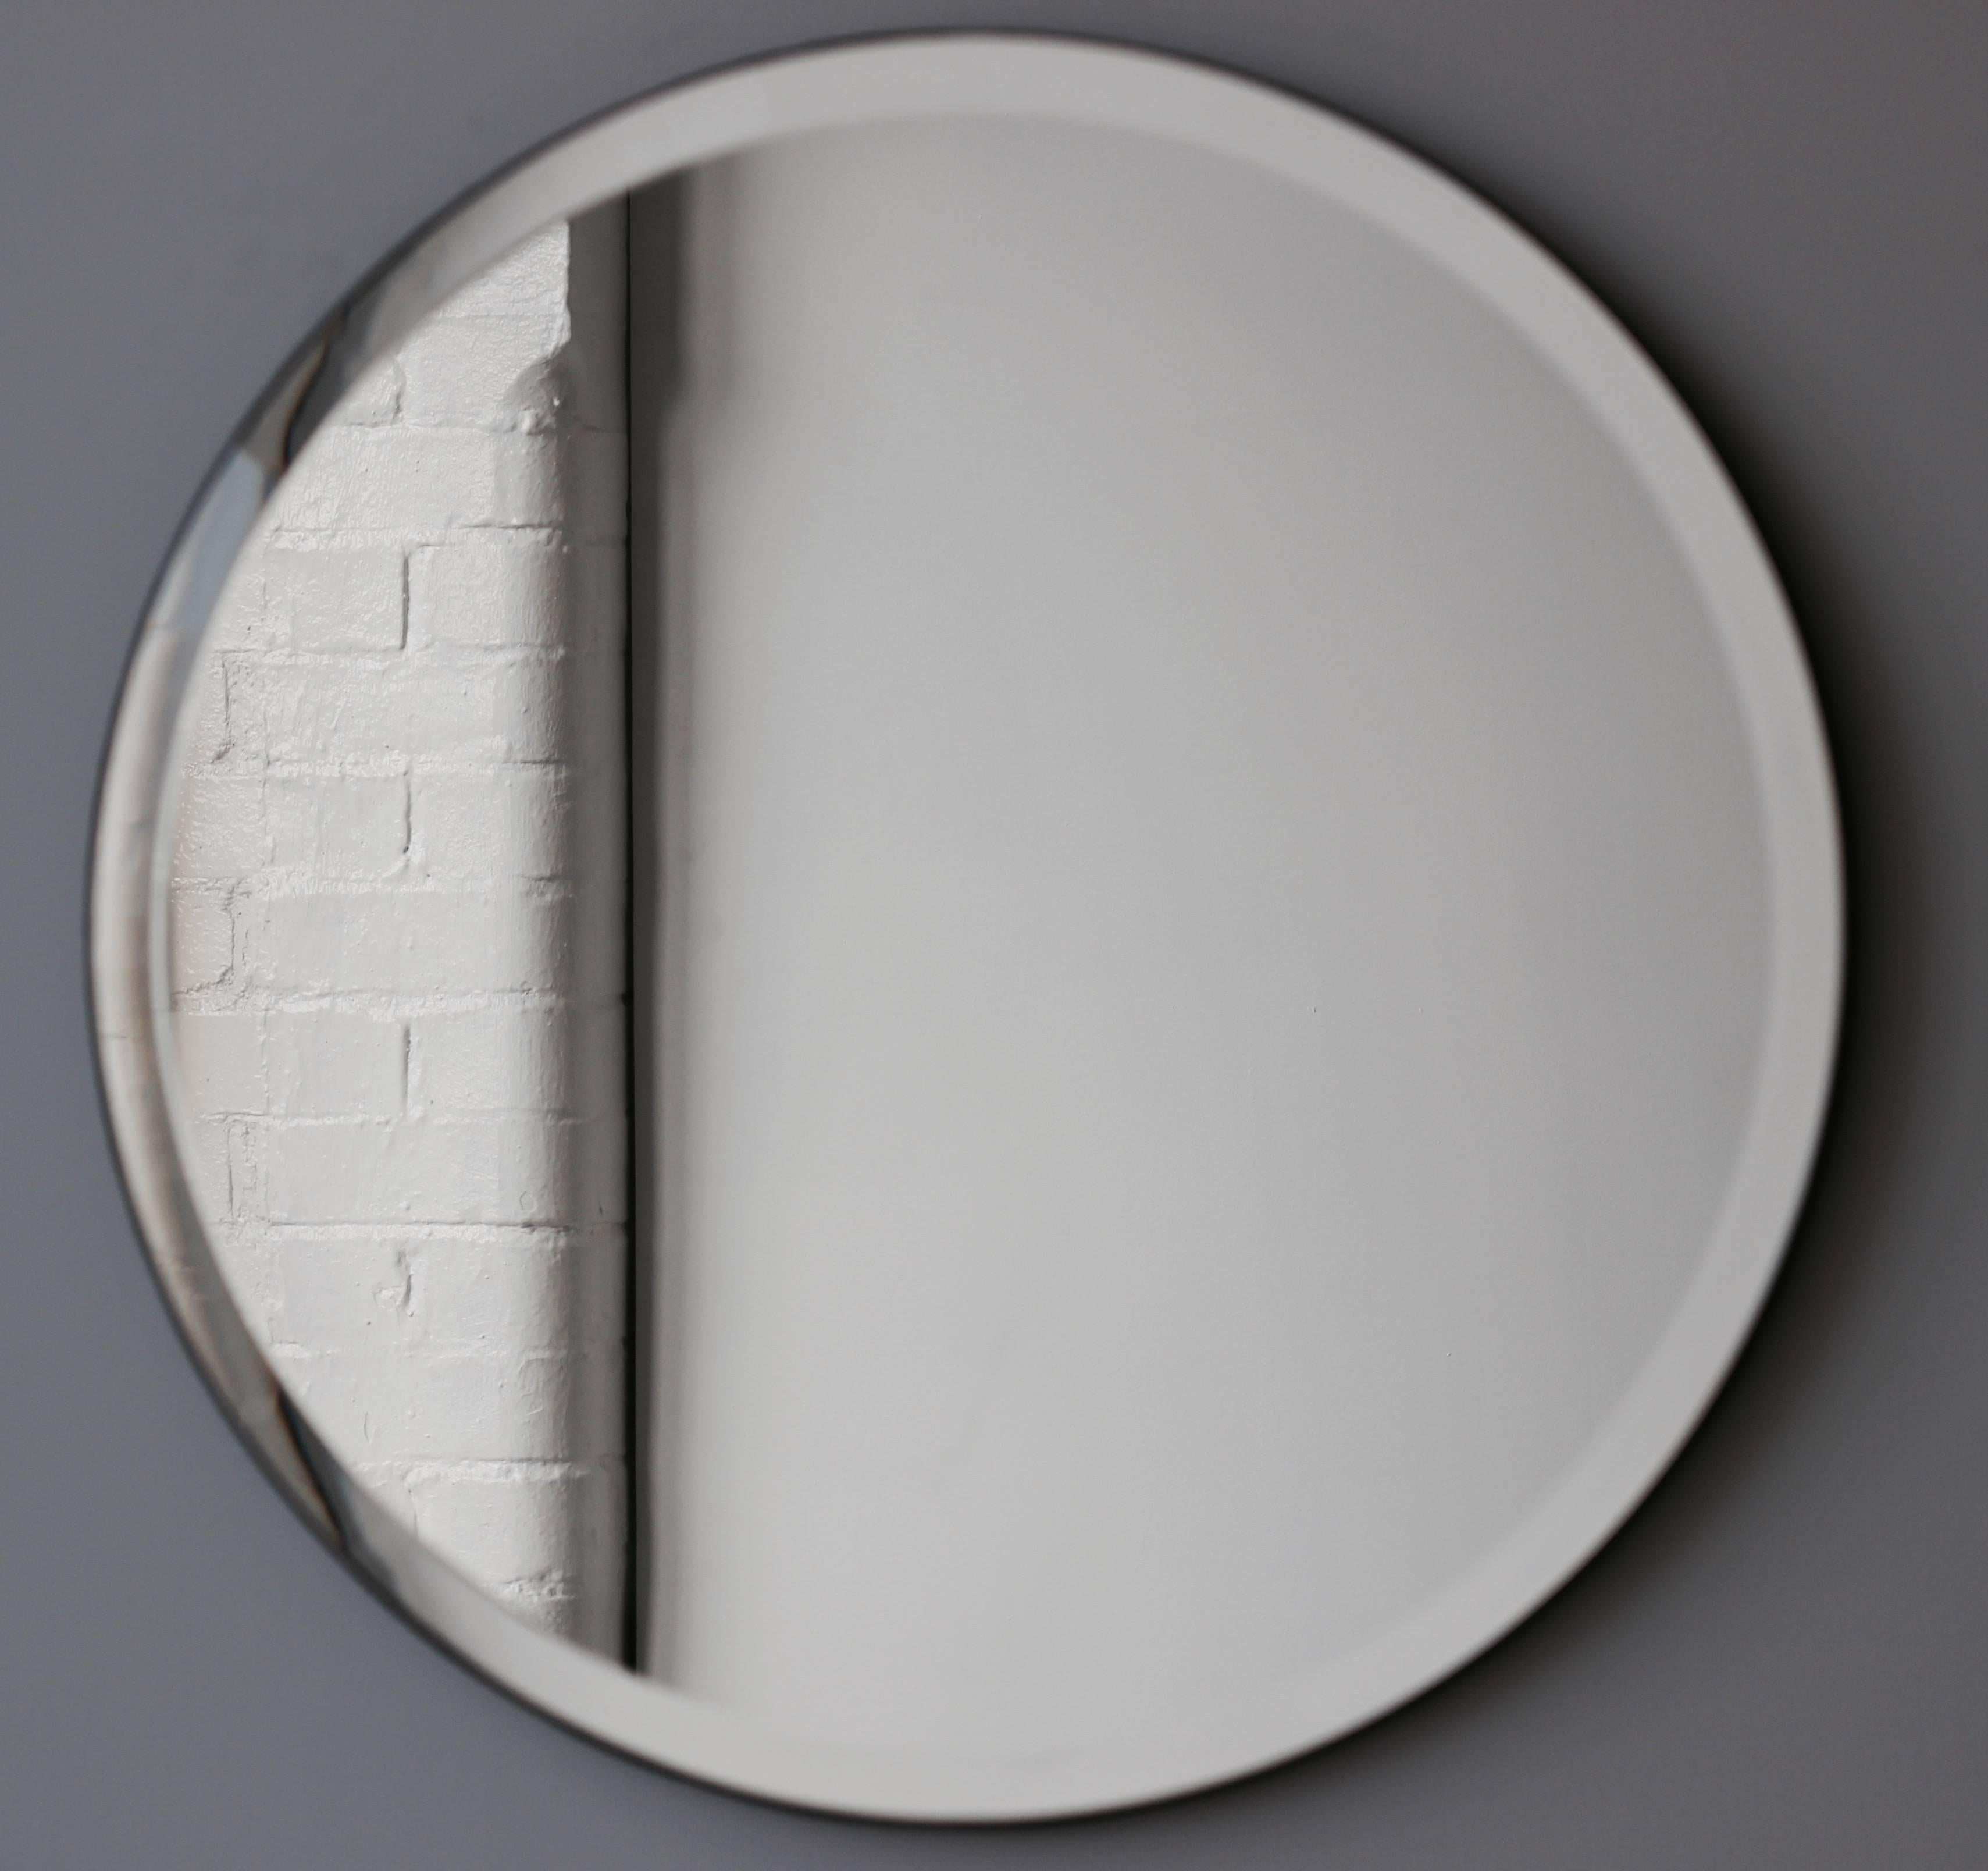 Delightful frameless mirror with an elegant bevel and velvet backing. Designed and handcrafted in London, UK.

This mirror is fully customisable. Please contact us for a quote for any bespoke specification or added options.

Shipped safely and